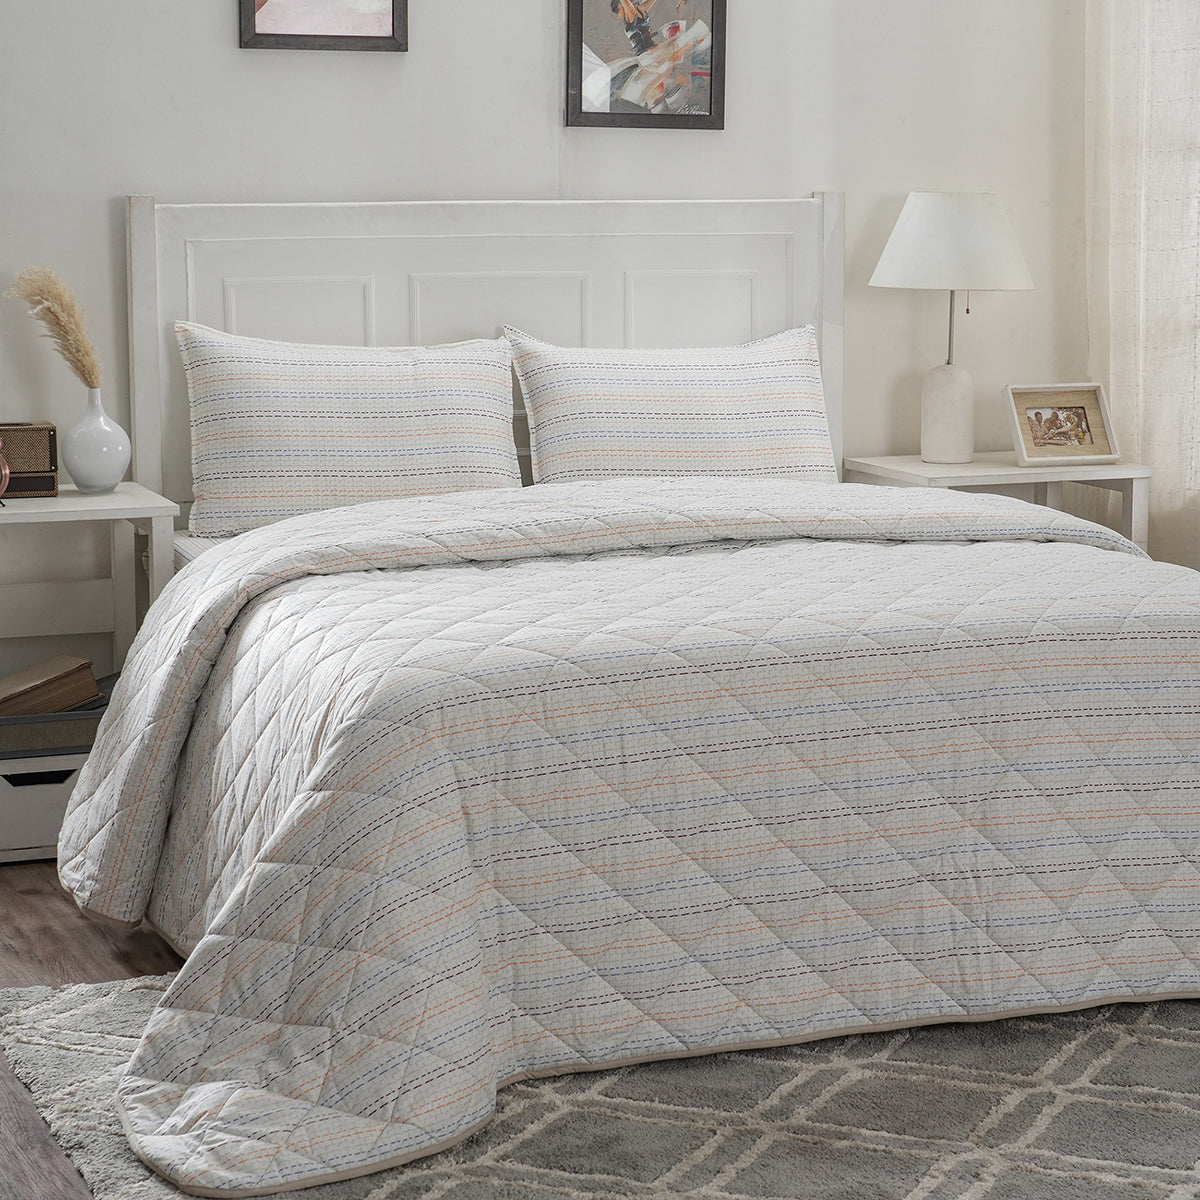 Optimist Bloom Atlair 4PC Quilt/Quilted Bed Cover Set